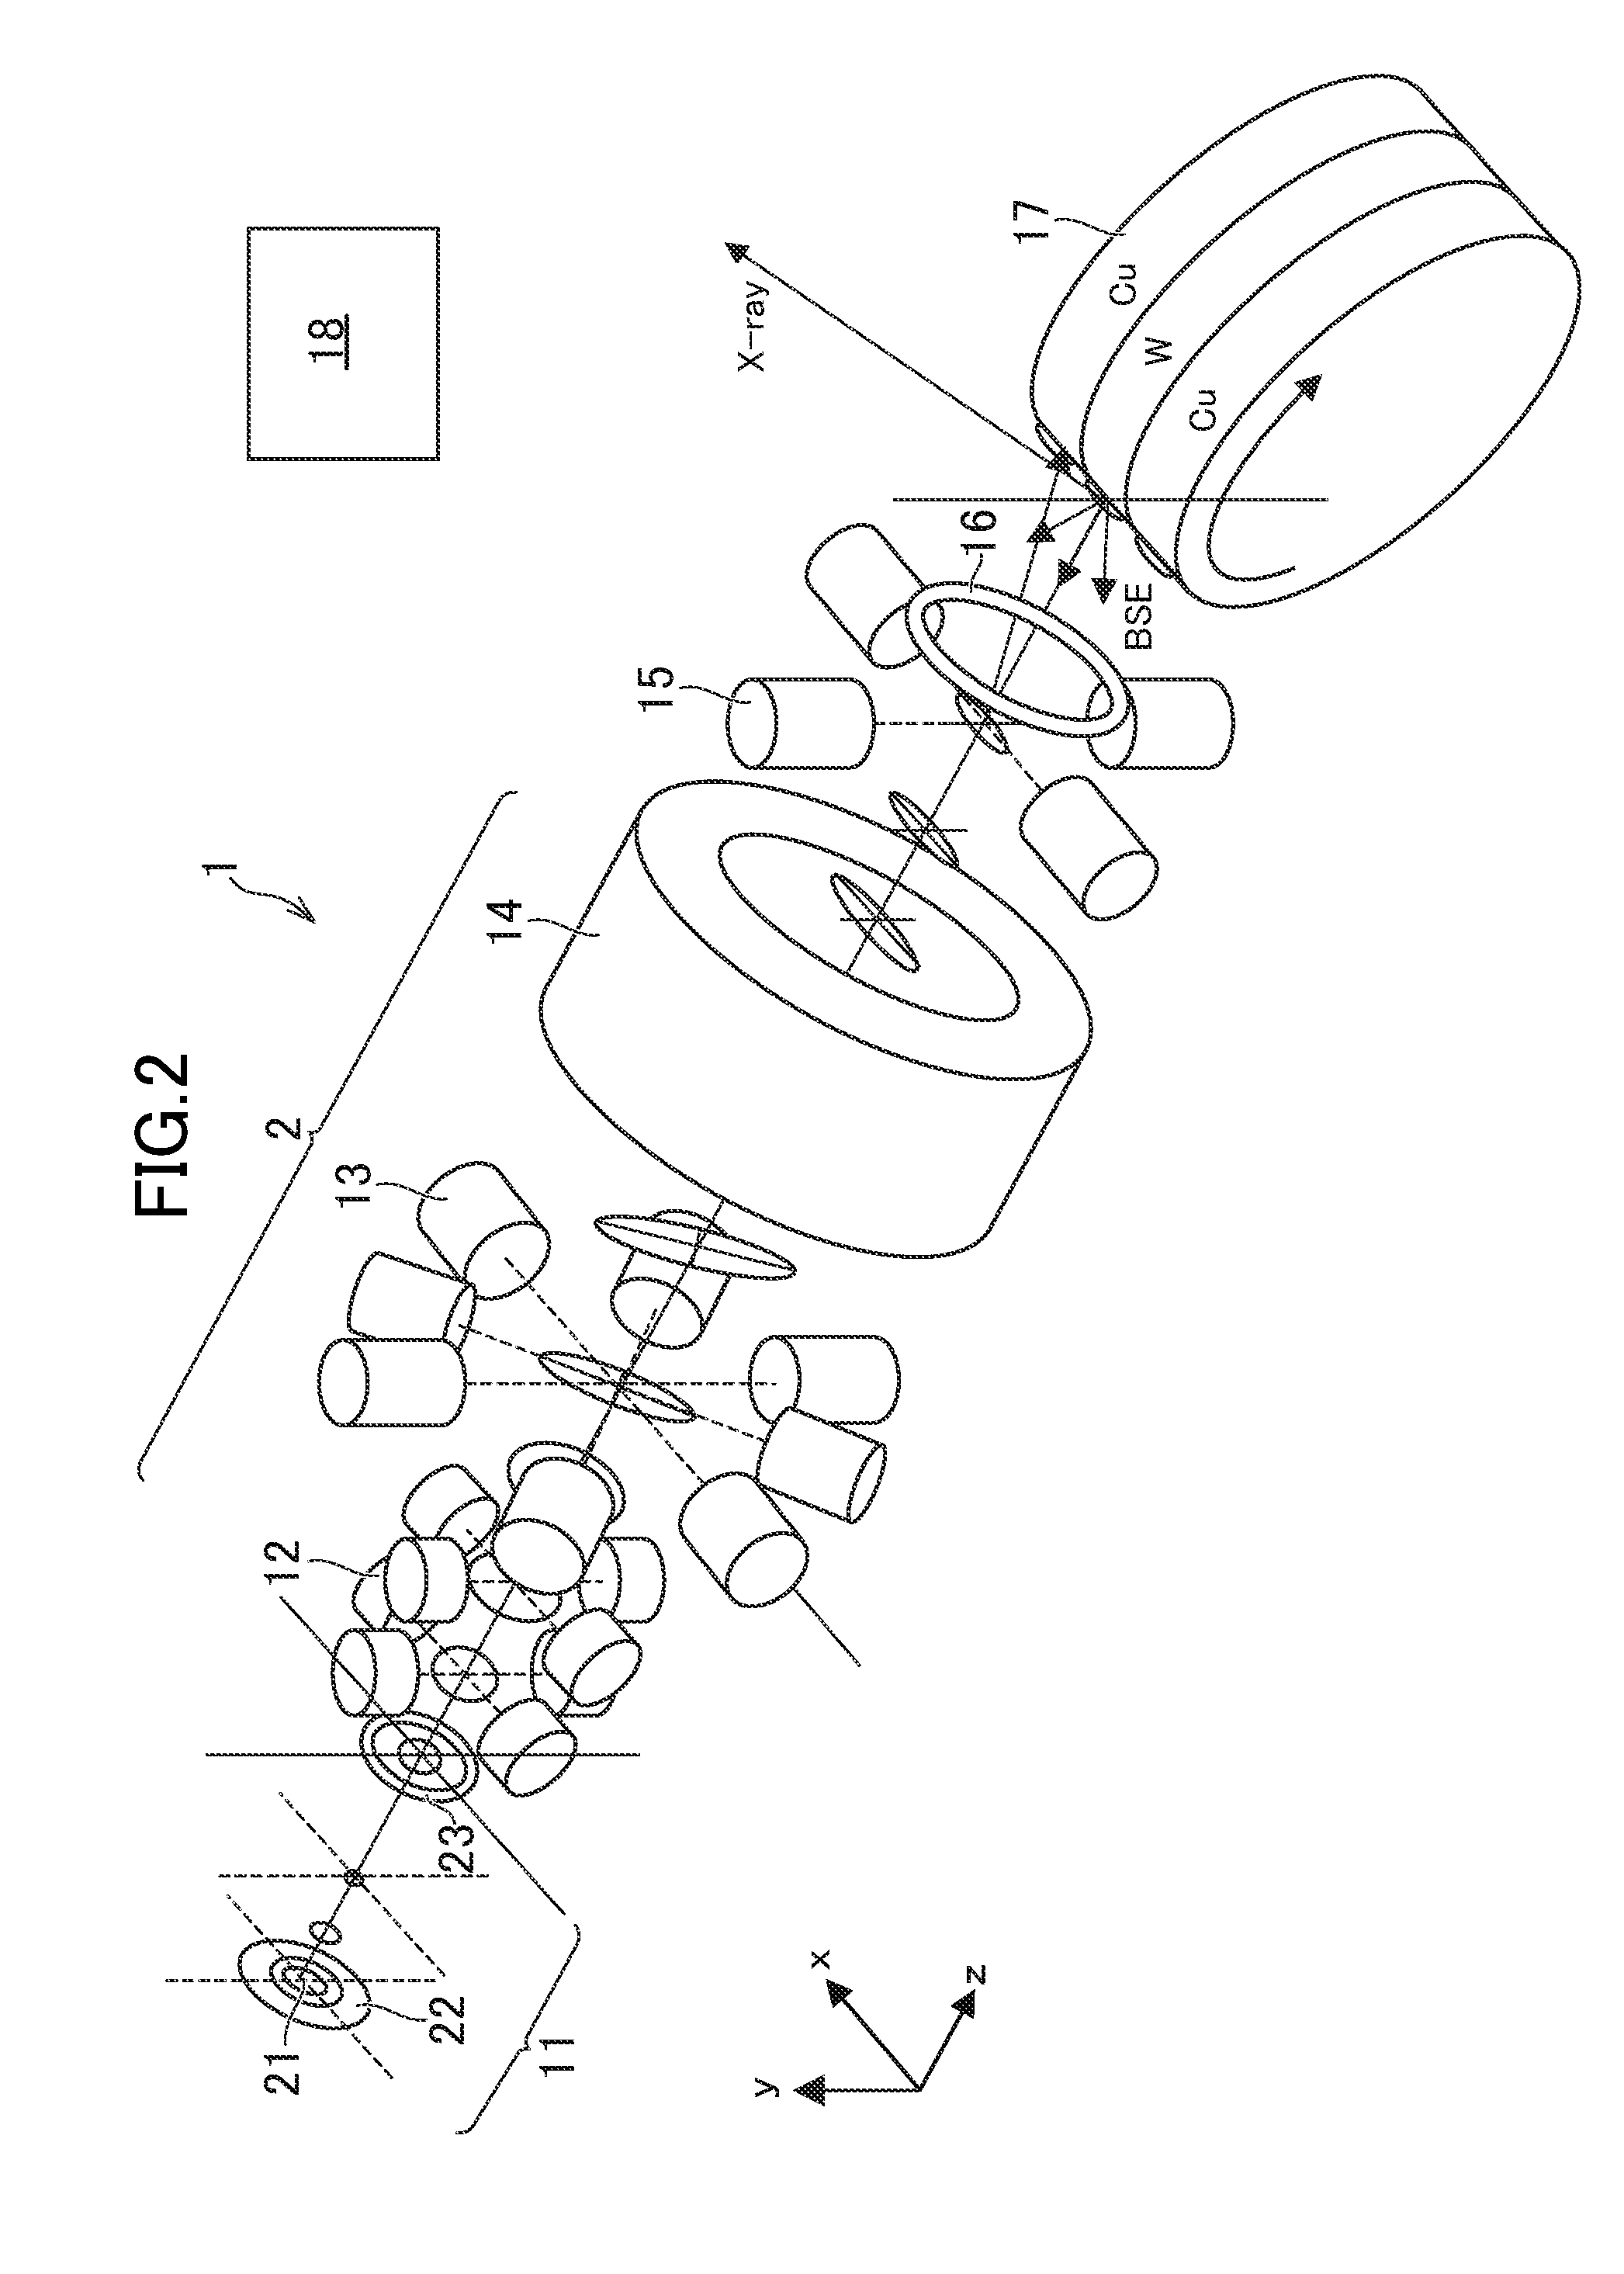 X-ray generator and adjustment method therefor